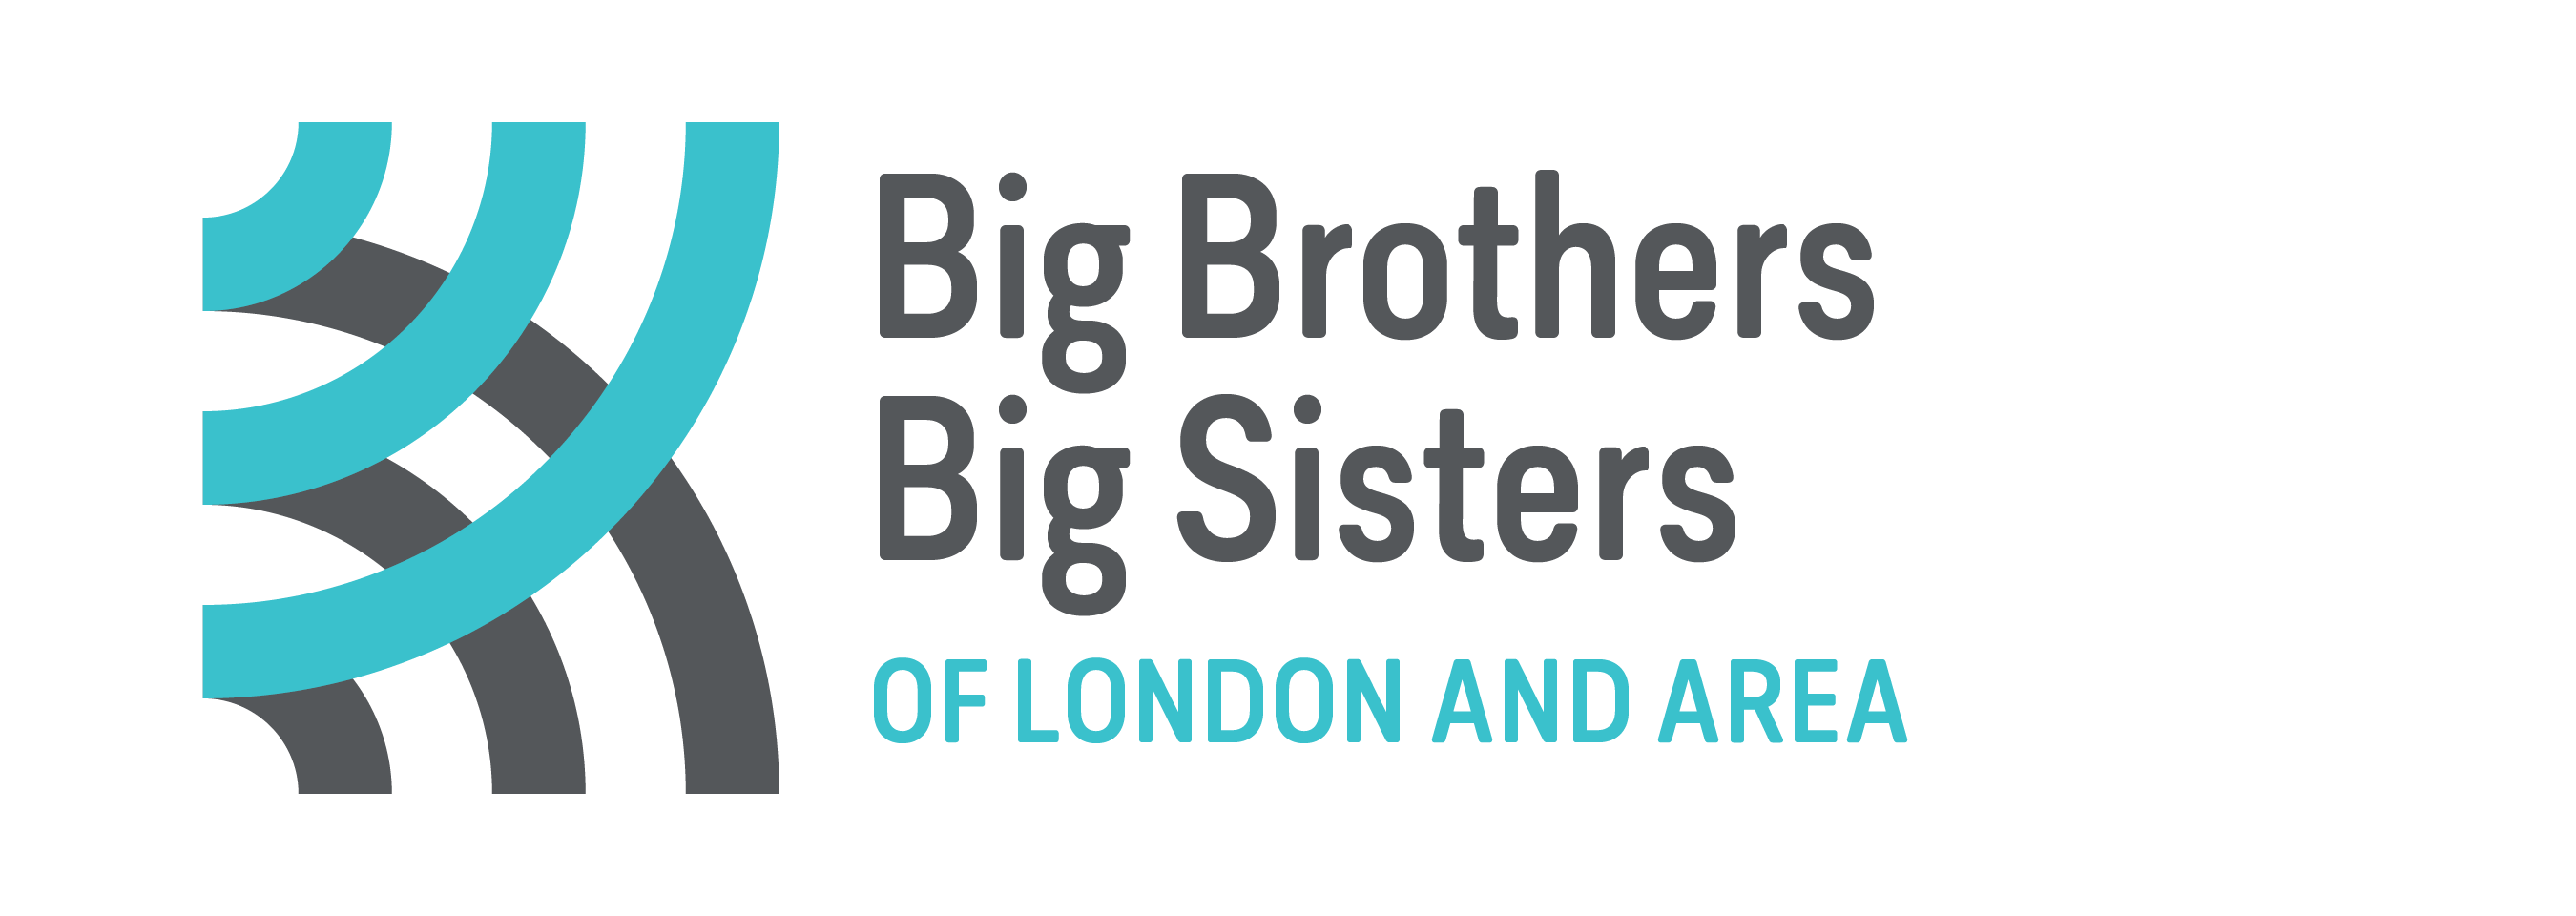 Big Brothers Big Sisters of London and Area Logo